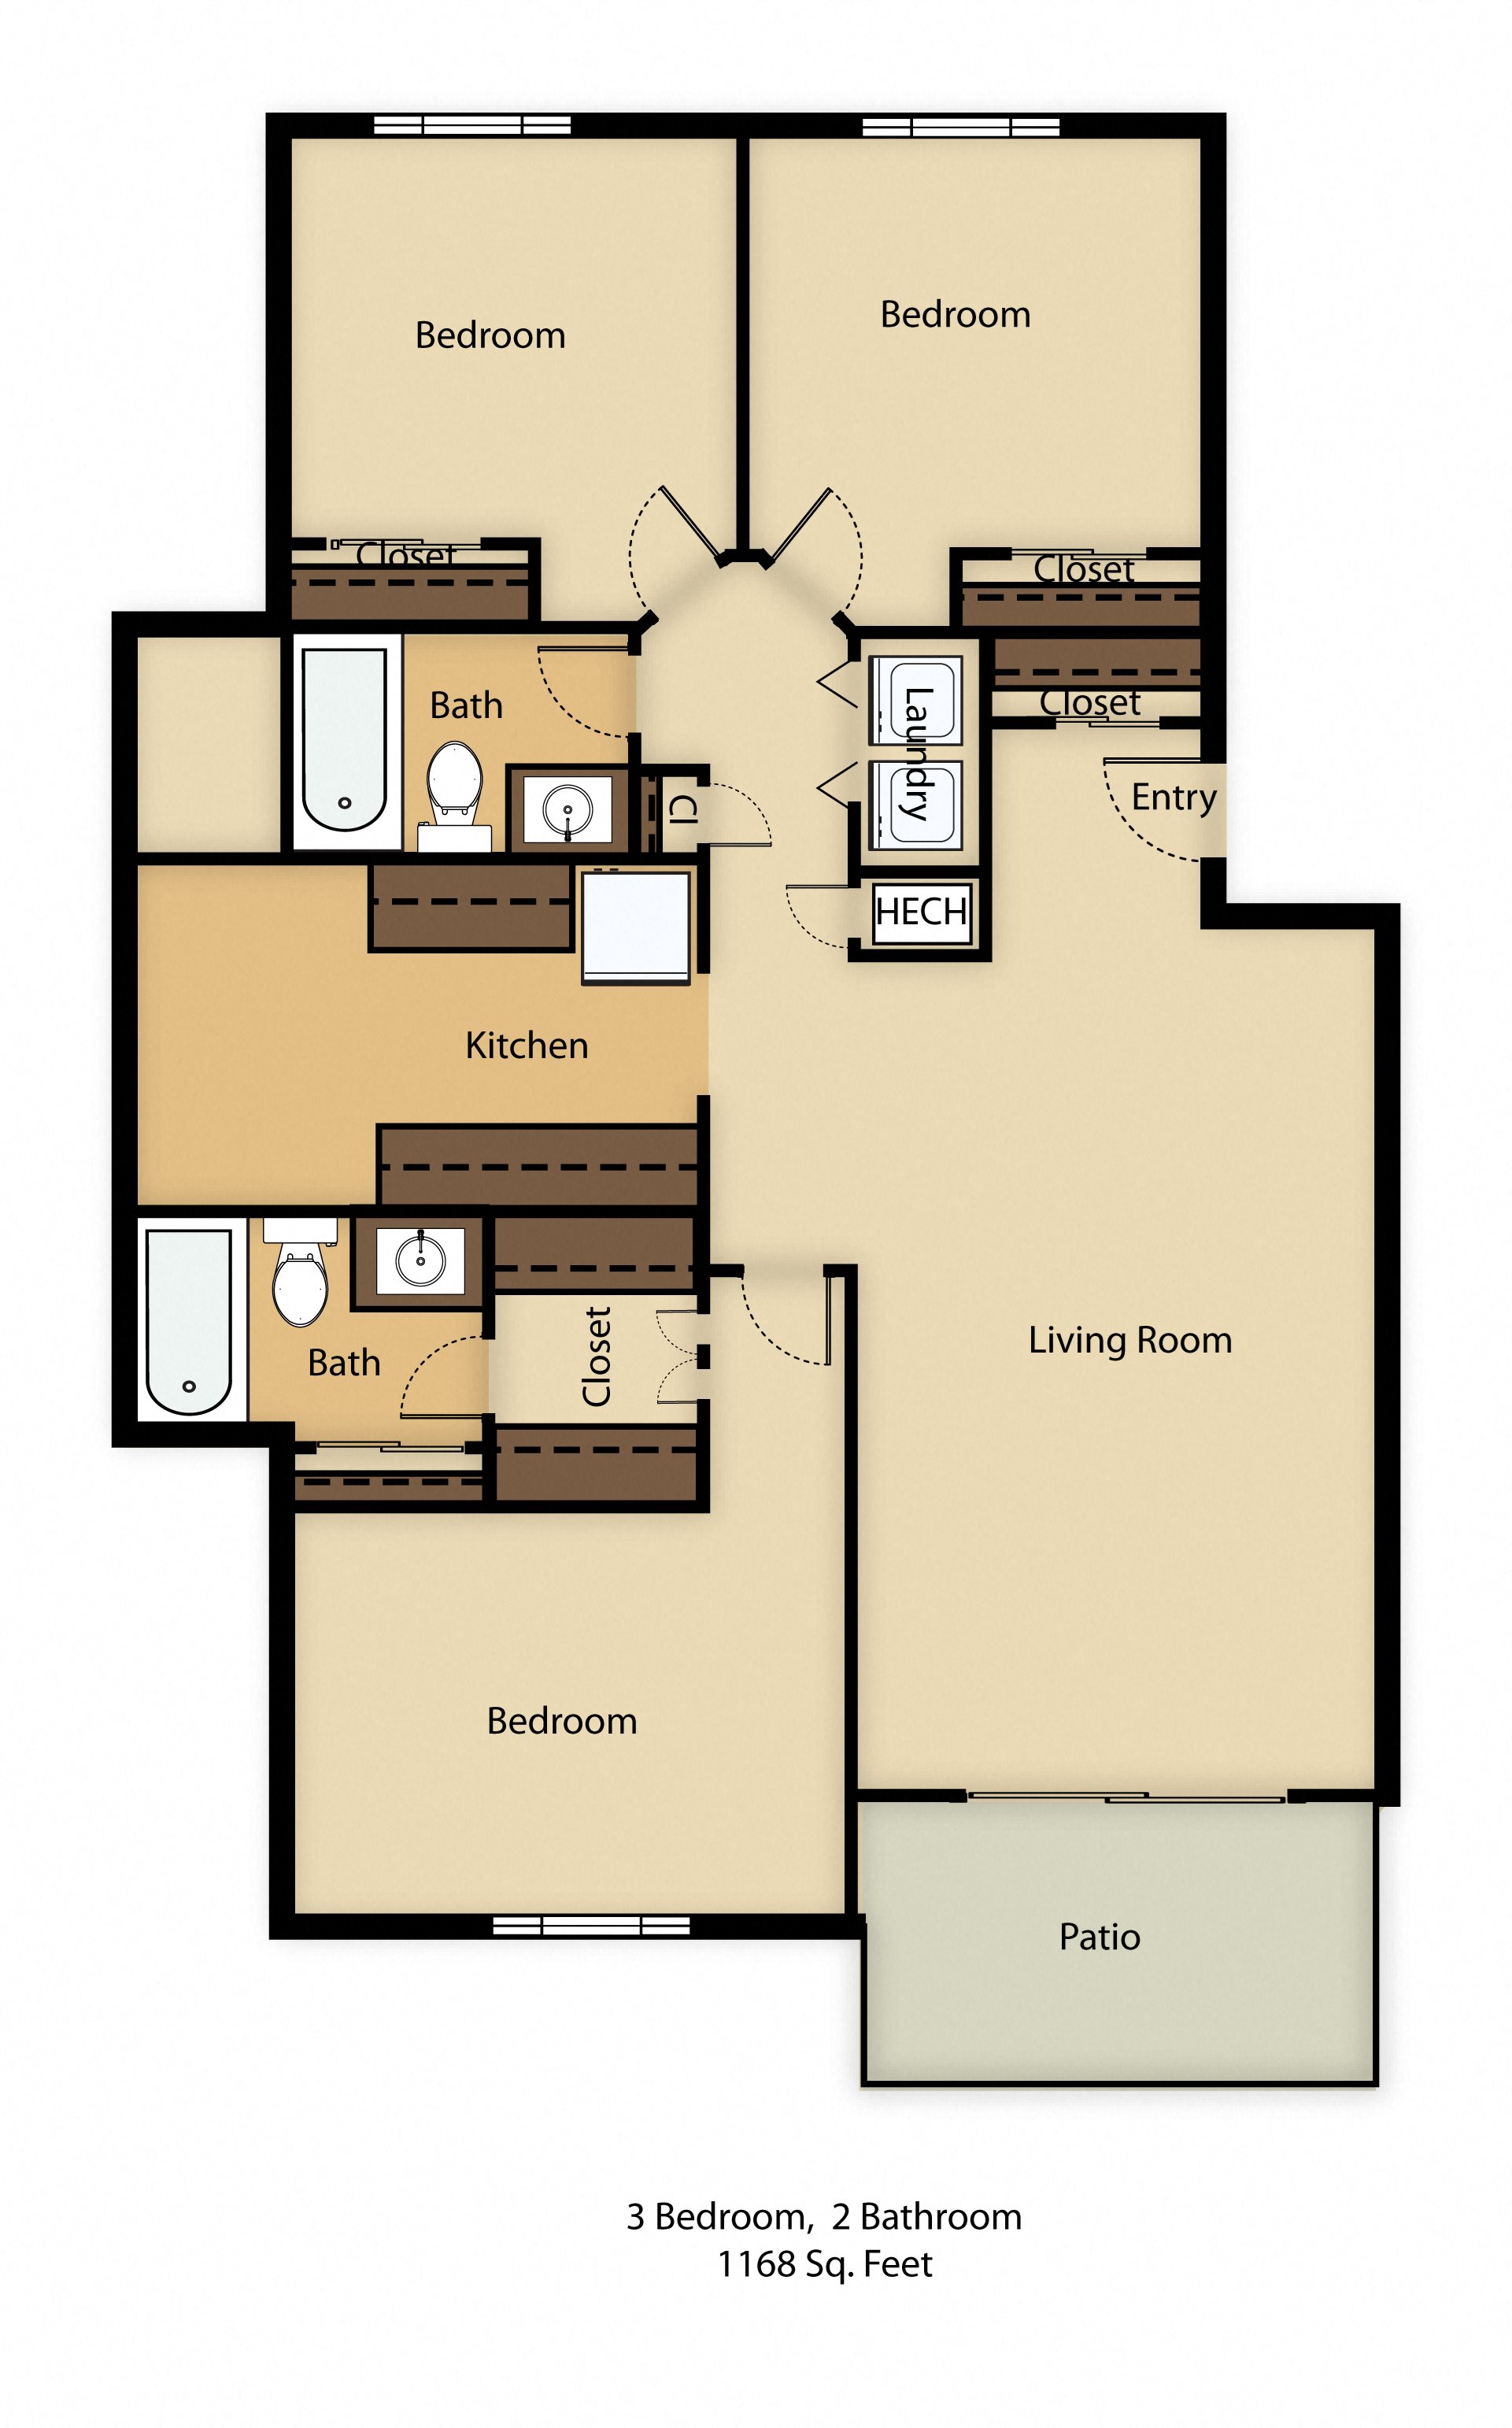 Floor Plans of Lake Grace Apartments in Chaska, MN